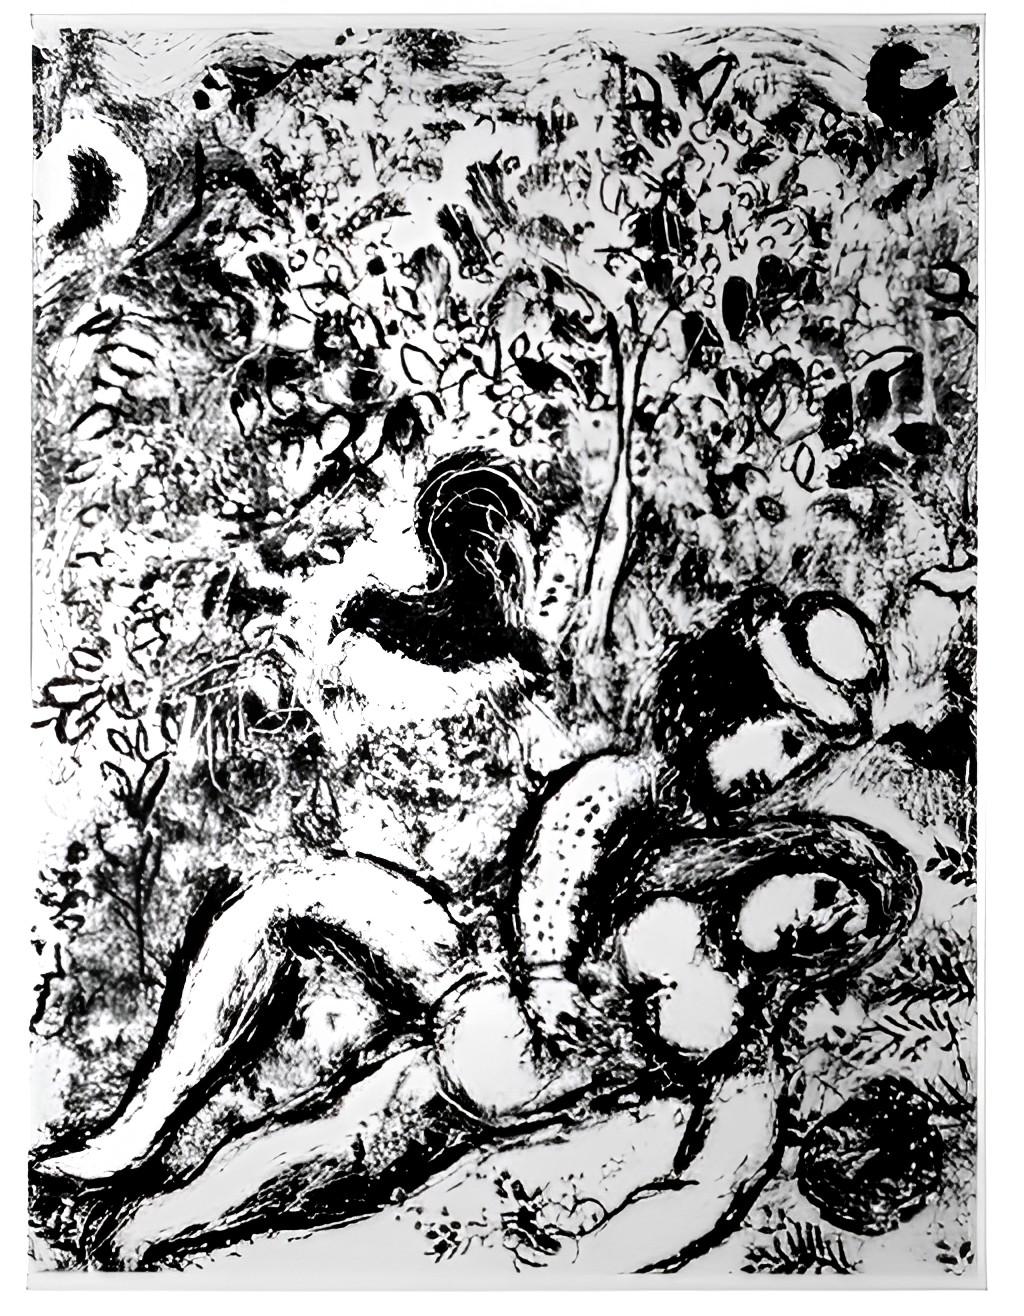 Couple Beside Tree from Chagall Lithographs I - Print by (after) Marc Chagall